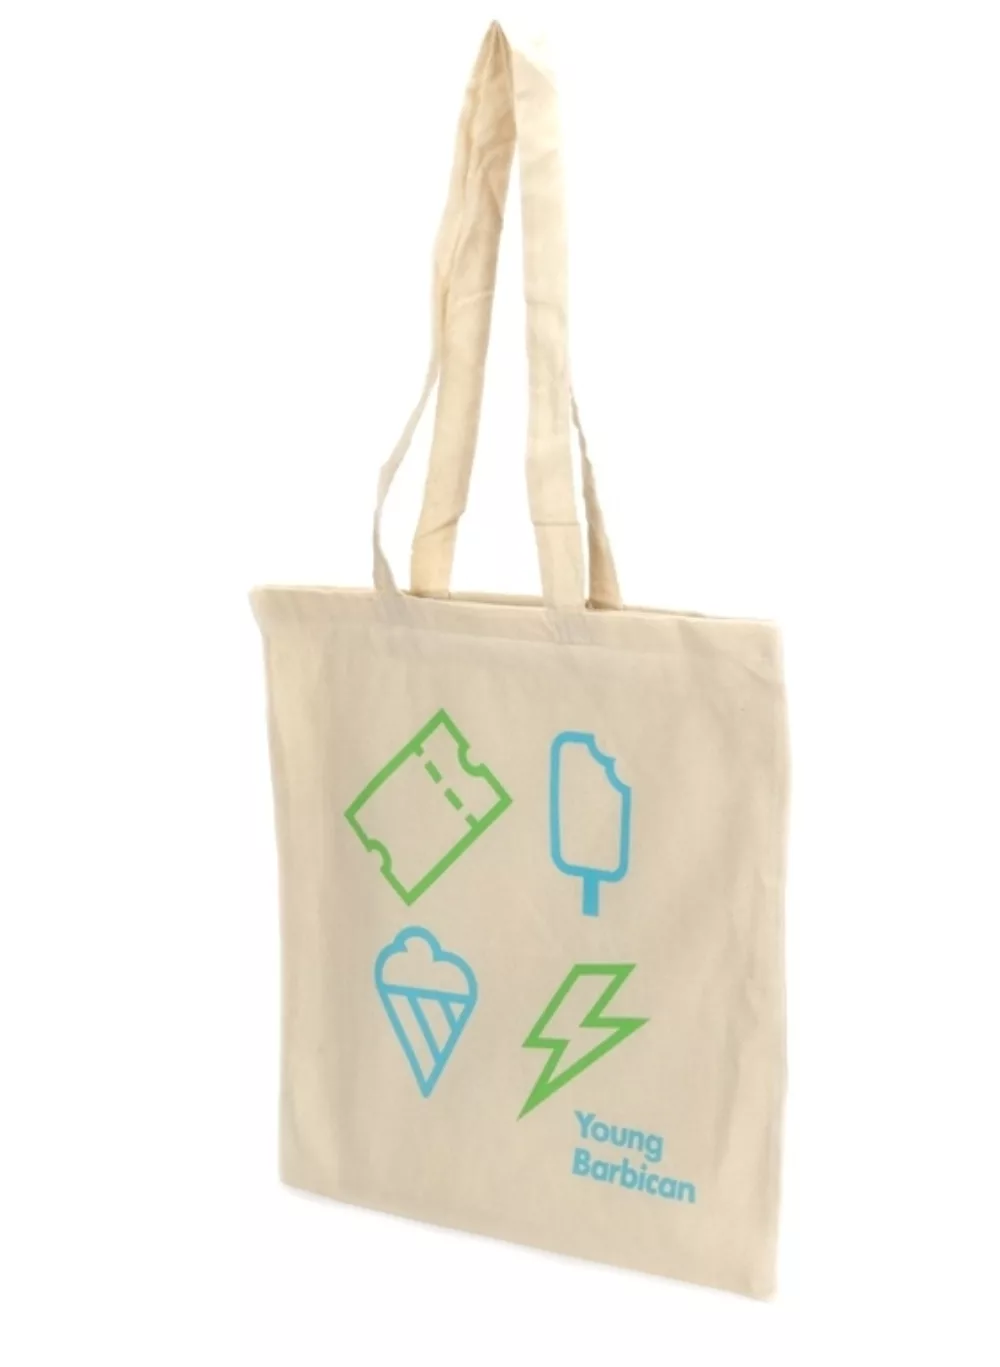 Create a Stunning Promotional Tote Bag in Just 7 Days!